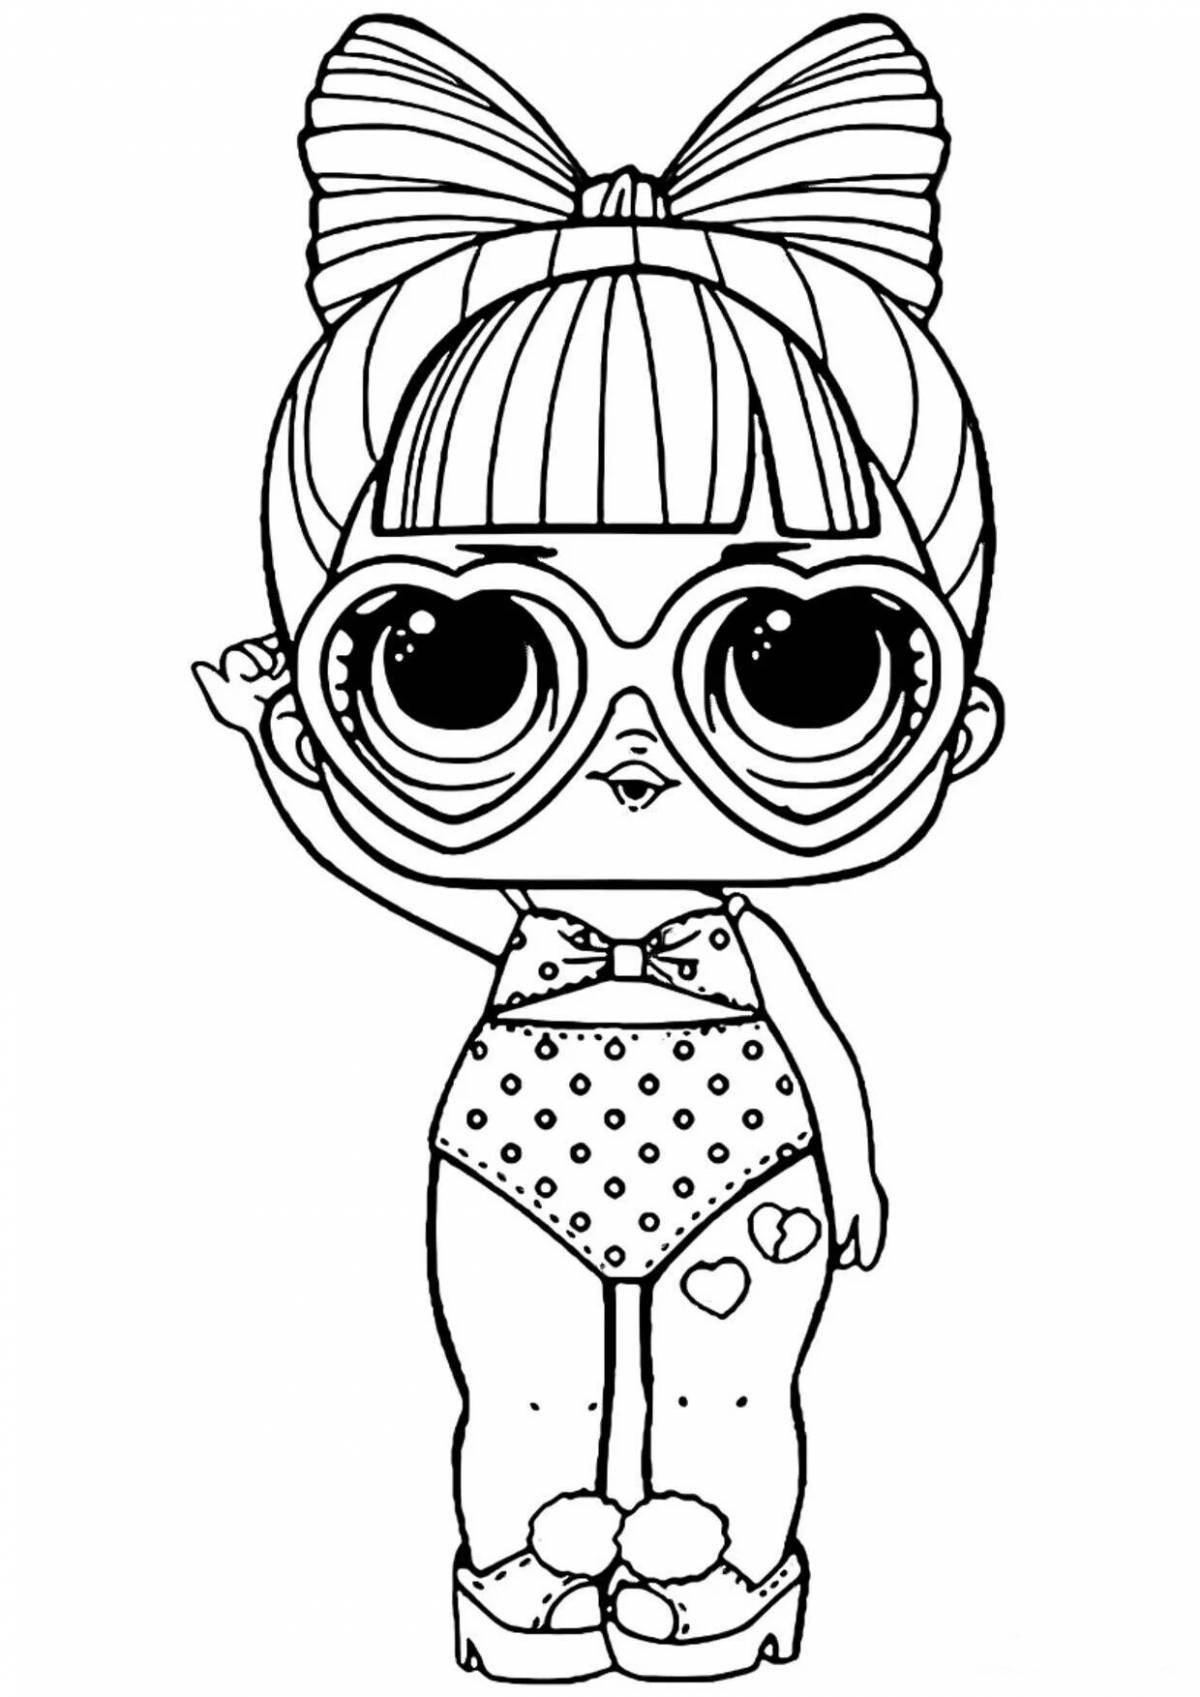 Fancy coloring lol doll coloring book